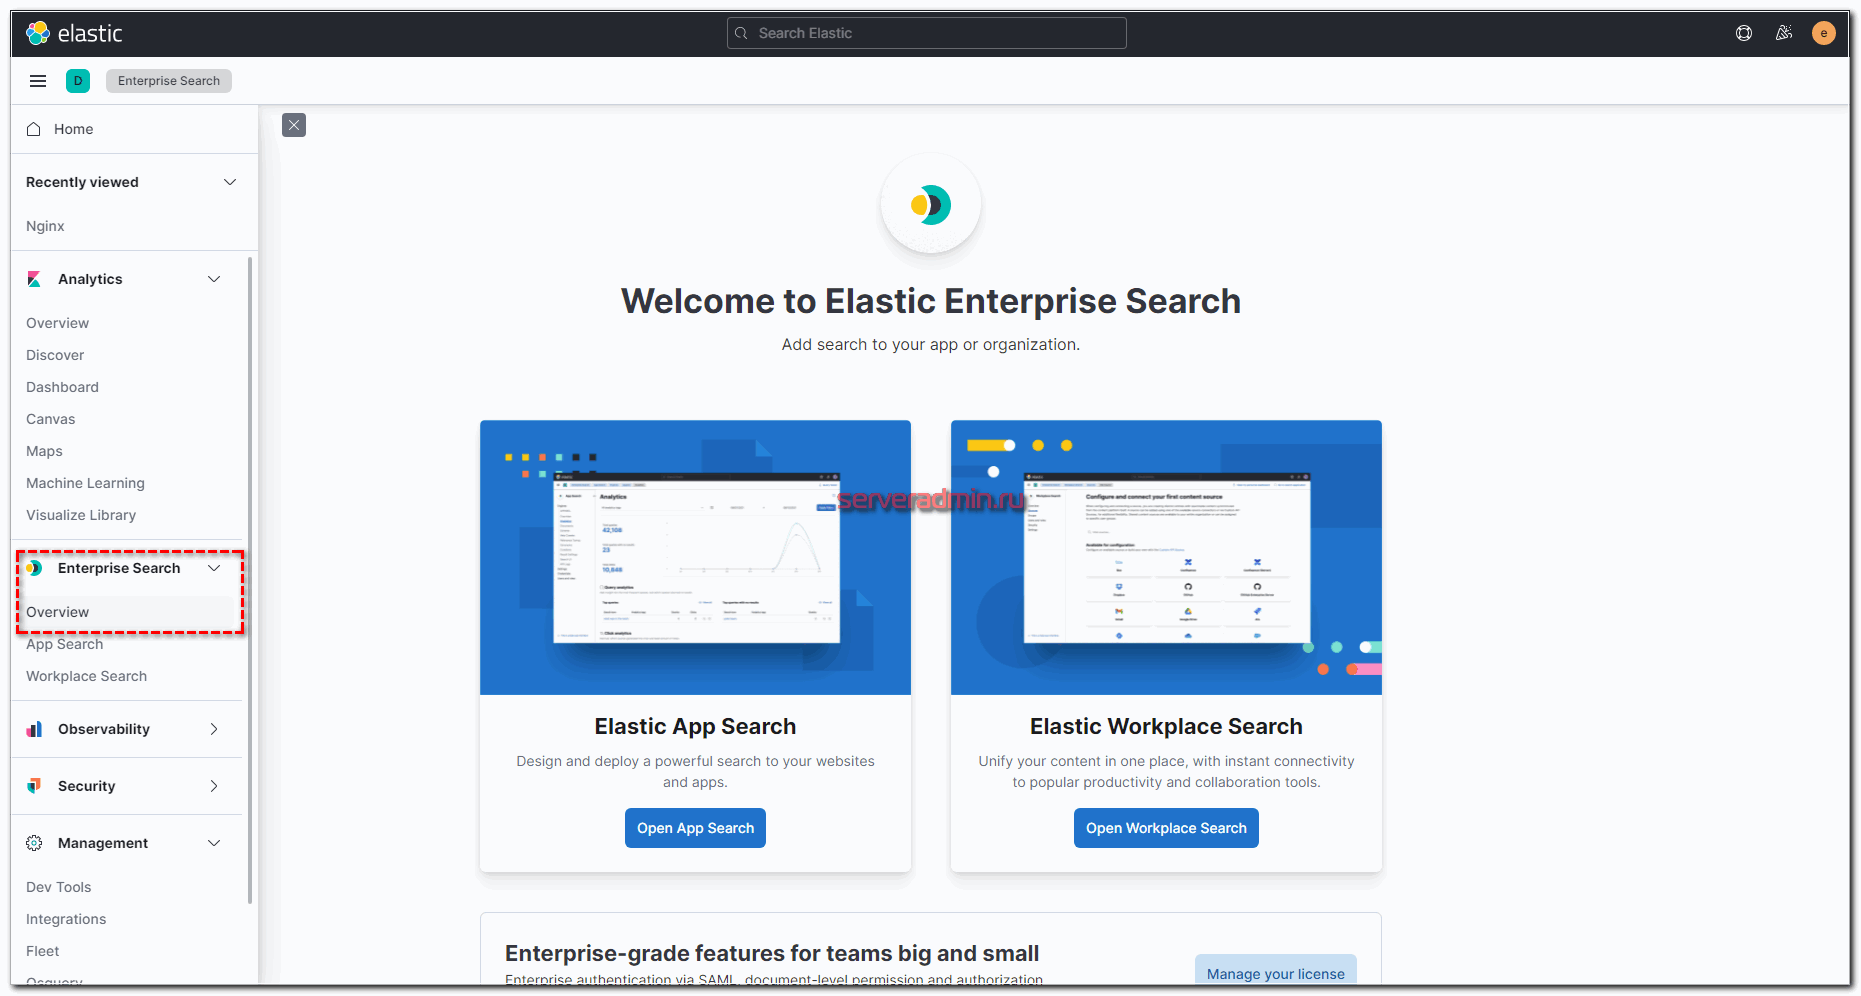 Welcome to Elastic Enterprise Search